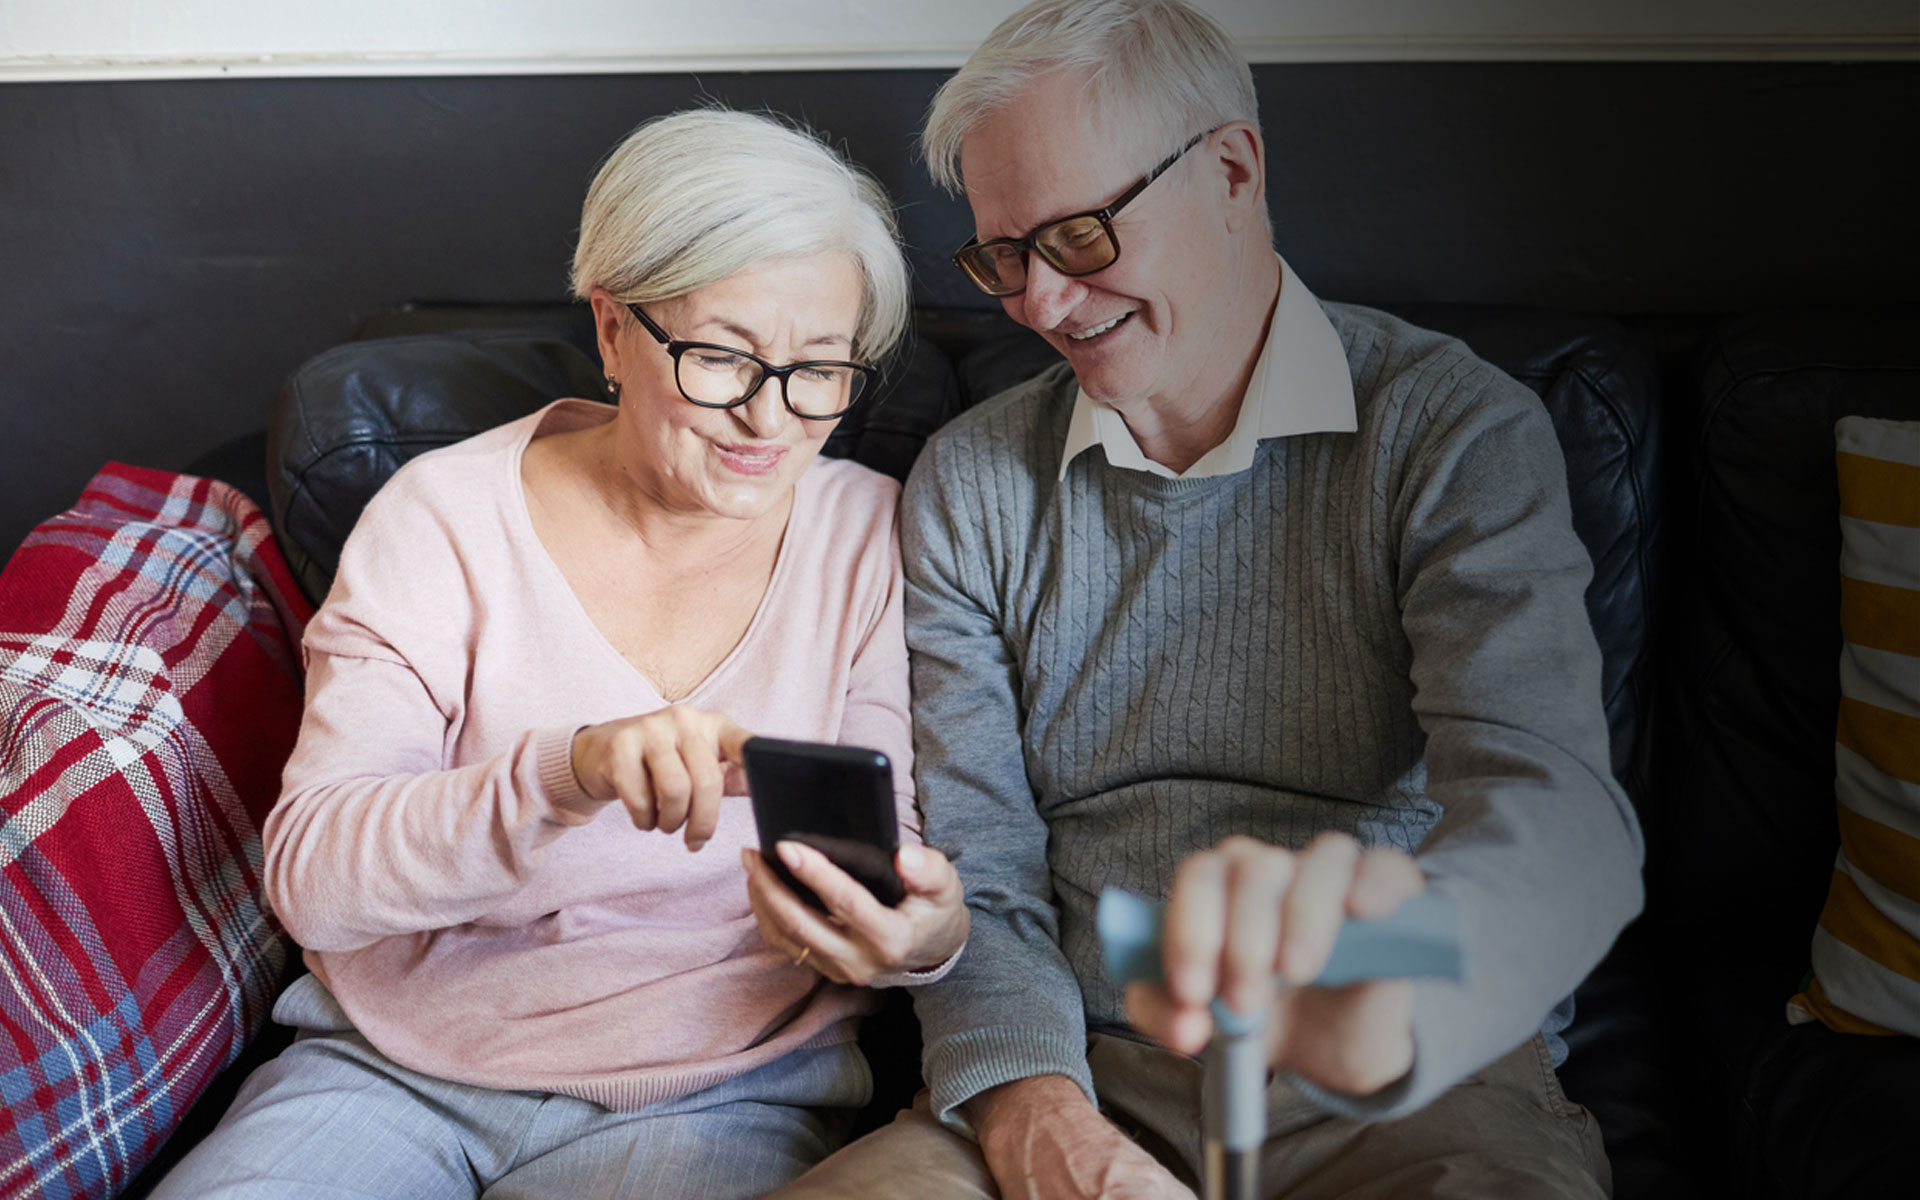 Older couple sitting on couch, looking at phone